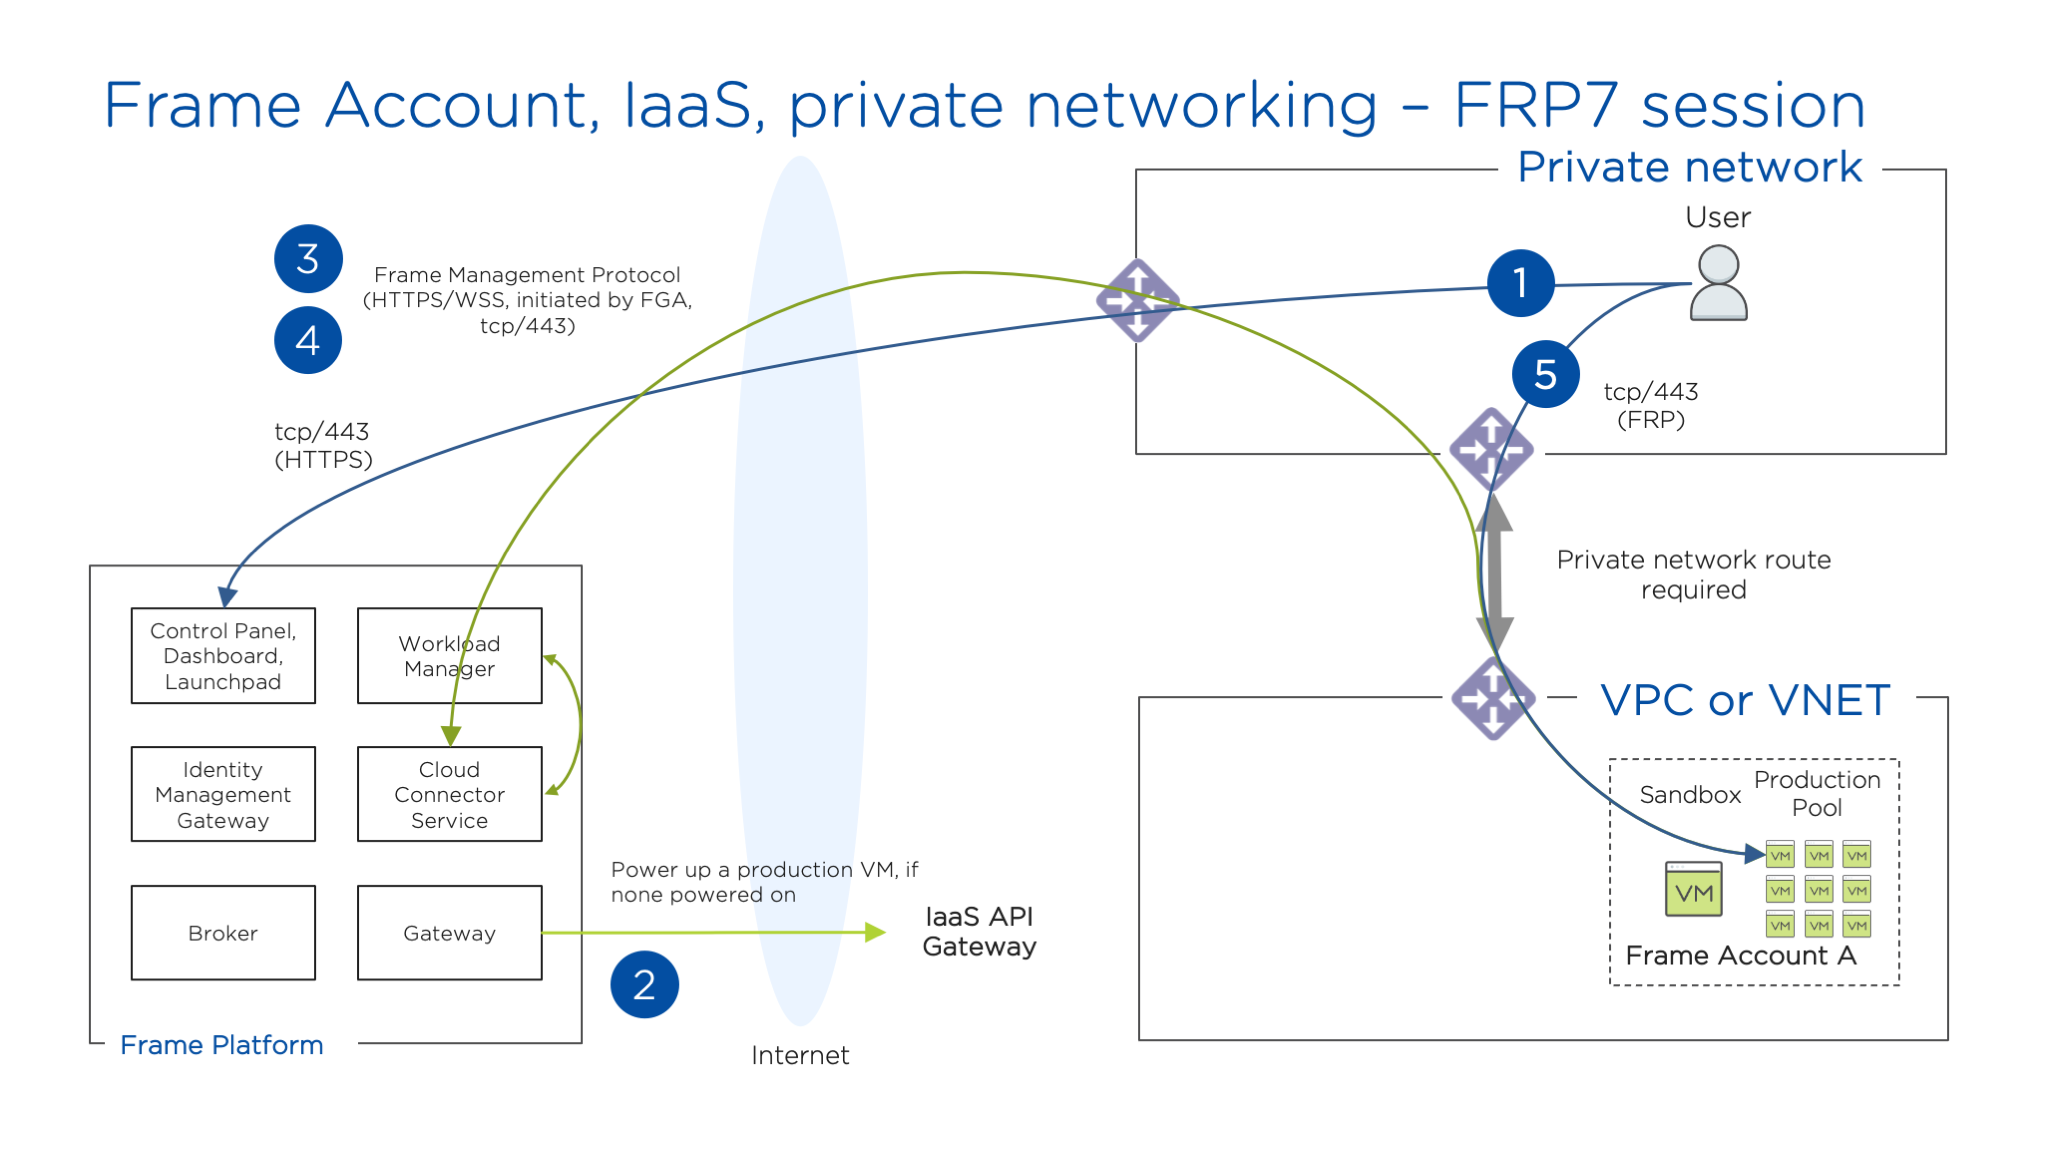 Public IaaS - Private Networking (FRP7)